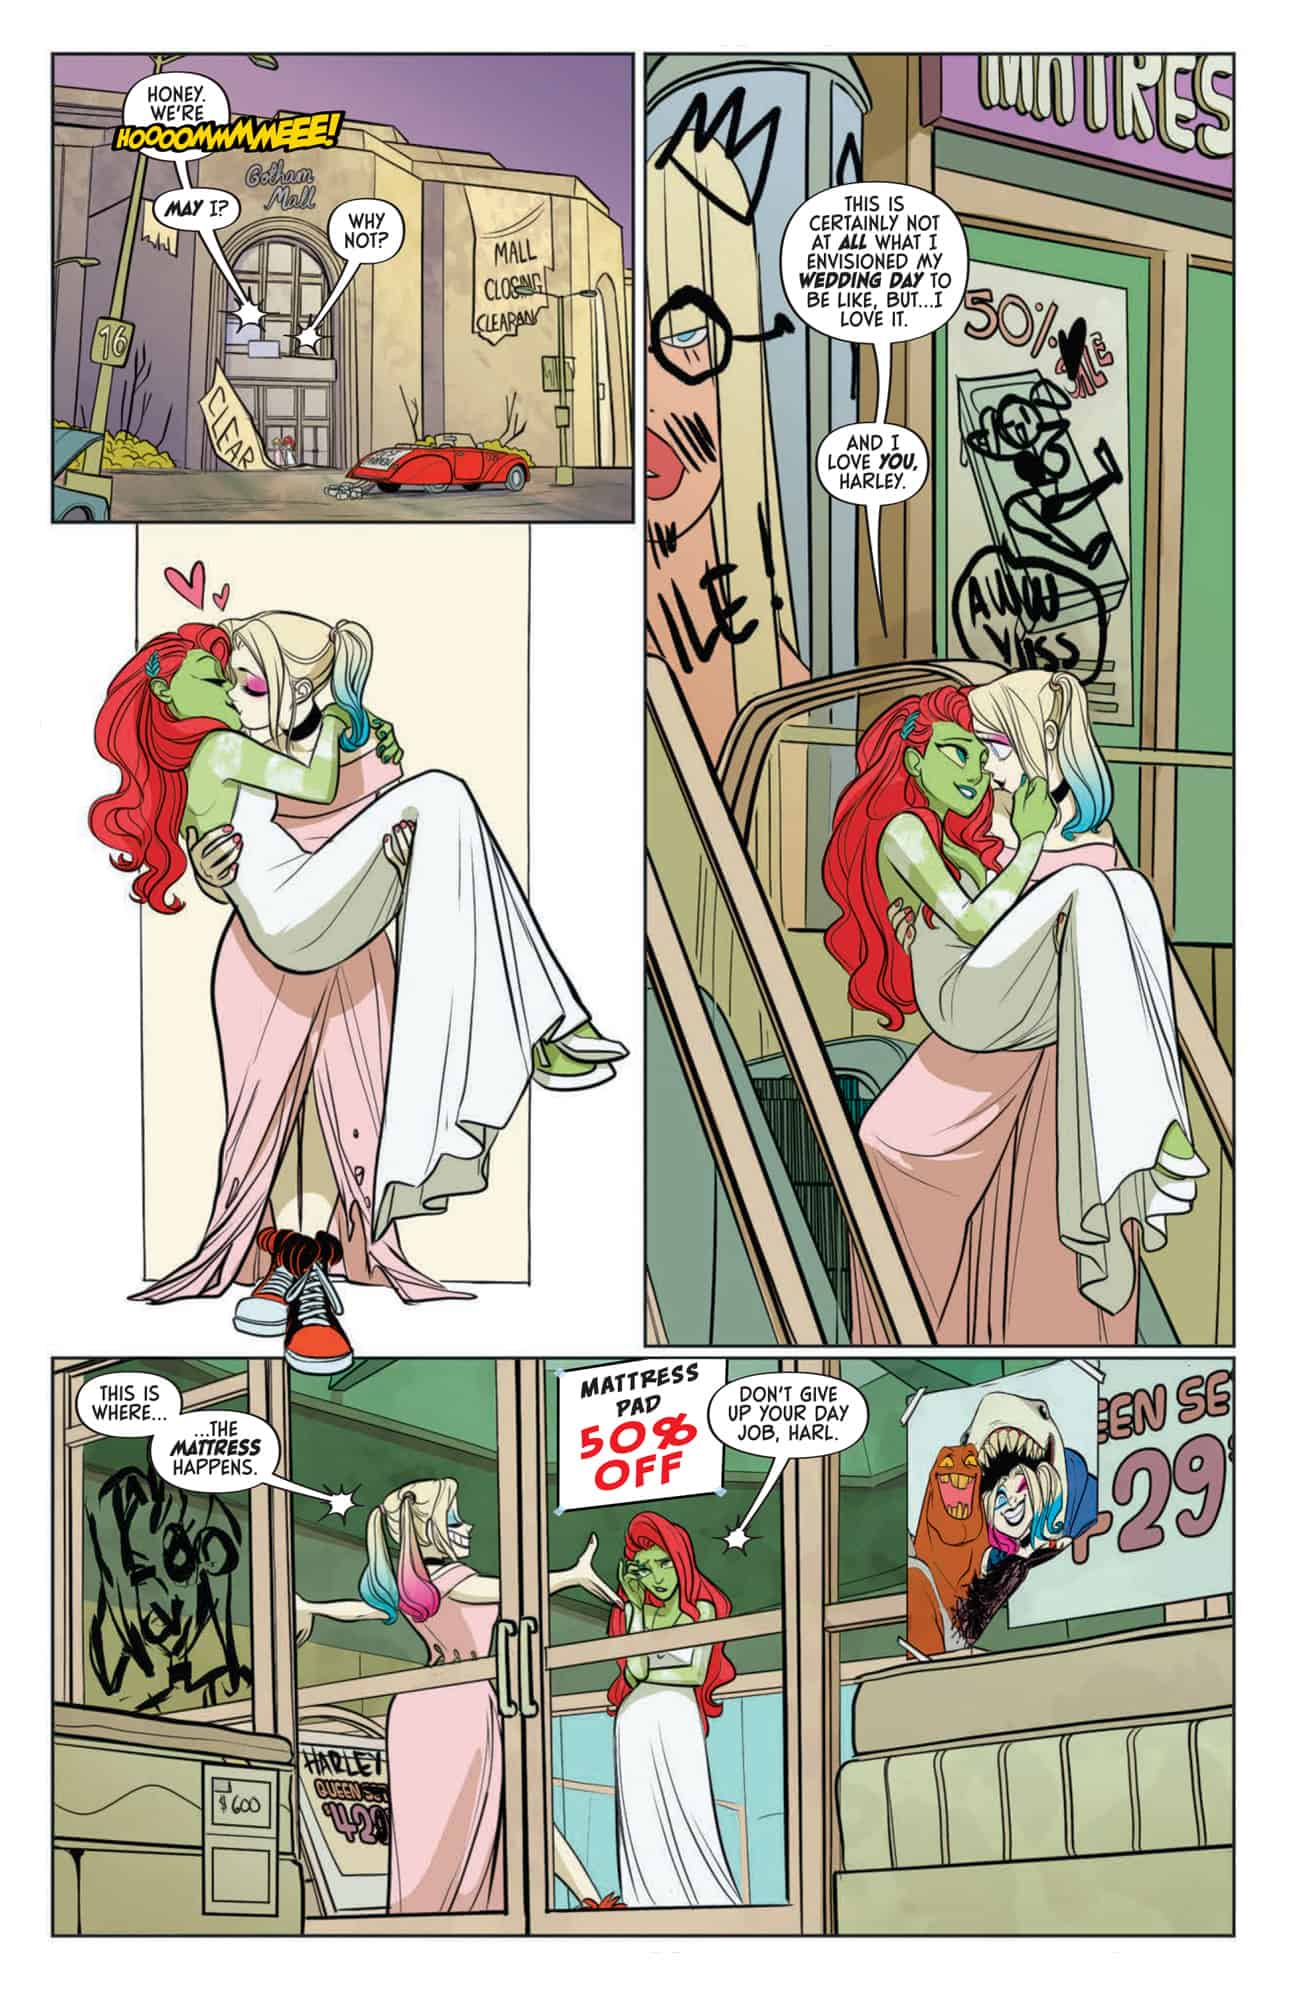 Harley and Ivy arrive at the abandoned mall Ivy has been using as a hideout. Harley picks up Ivy and carries her over the threshold as if the two of them have just gotten married. Ivy is still wearing the wedding dress. Both are staring lovingly at one another. Harley carries Ivy into the messy mattress showroom she has been using as her bedroom. She jokes to Ivy that "This is where the mattress happens!" Ivy tells her not to quit her day job.